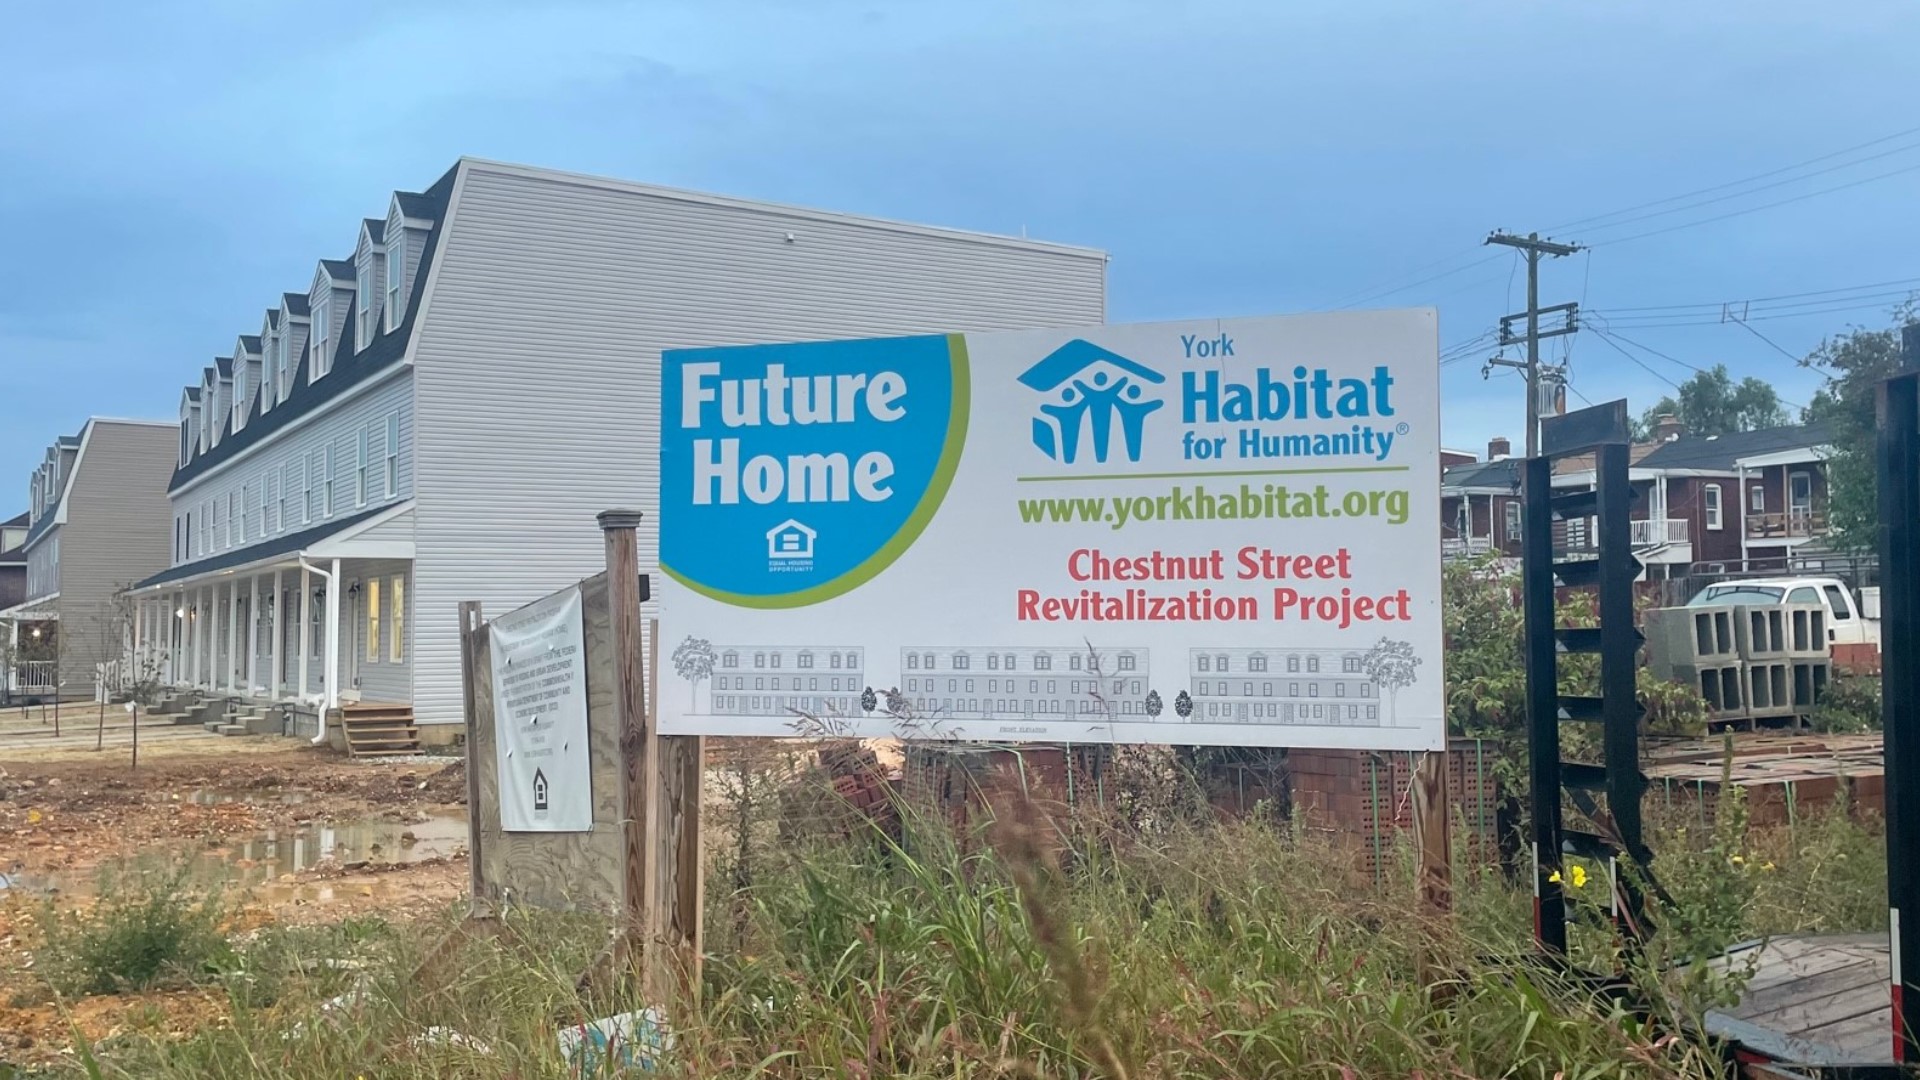 York Habitat for Humanity and several other local organizations are celebrating World Habitat Day on Monday.